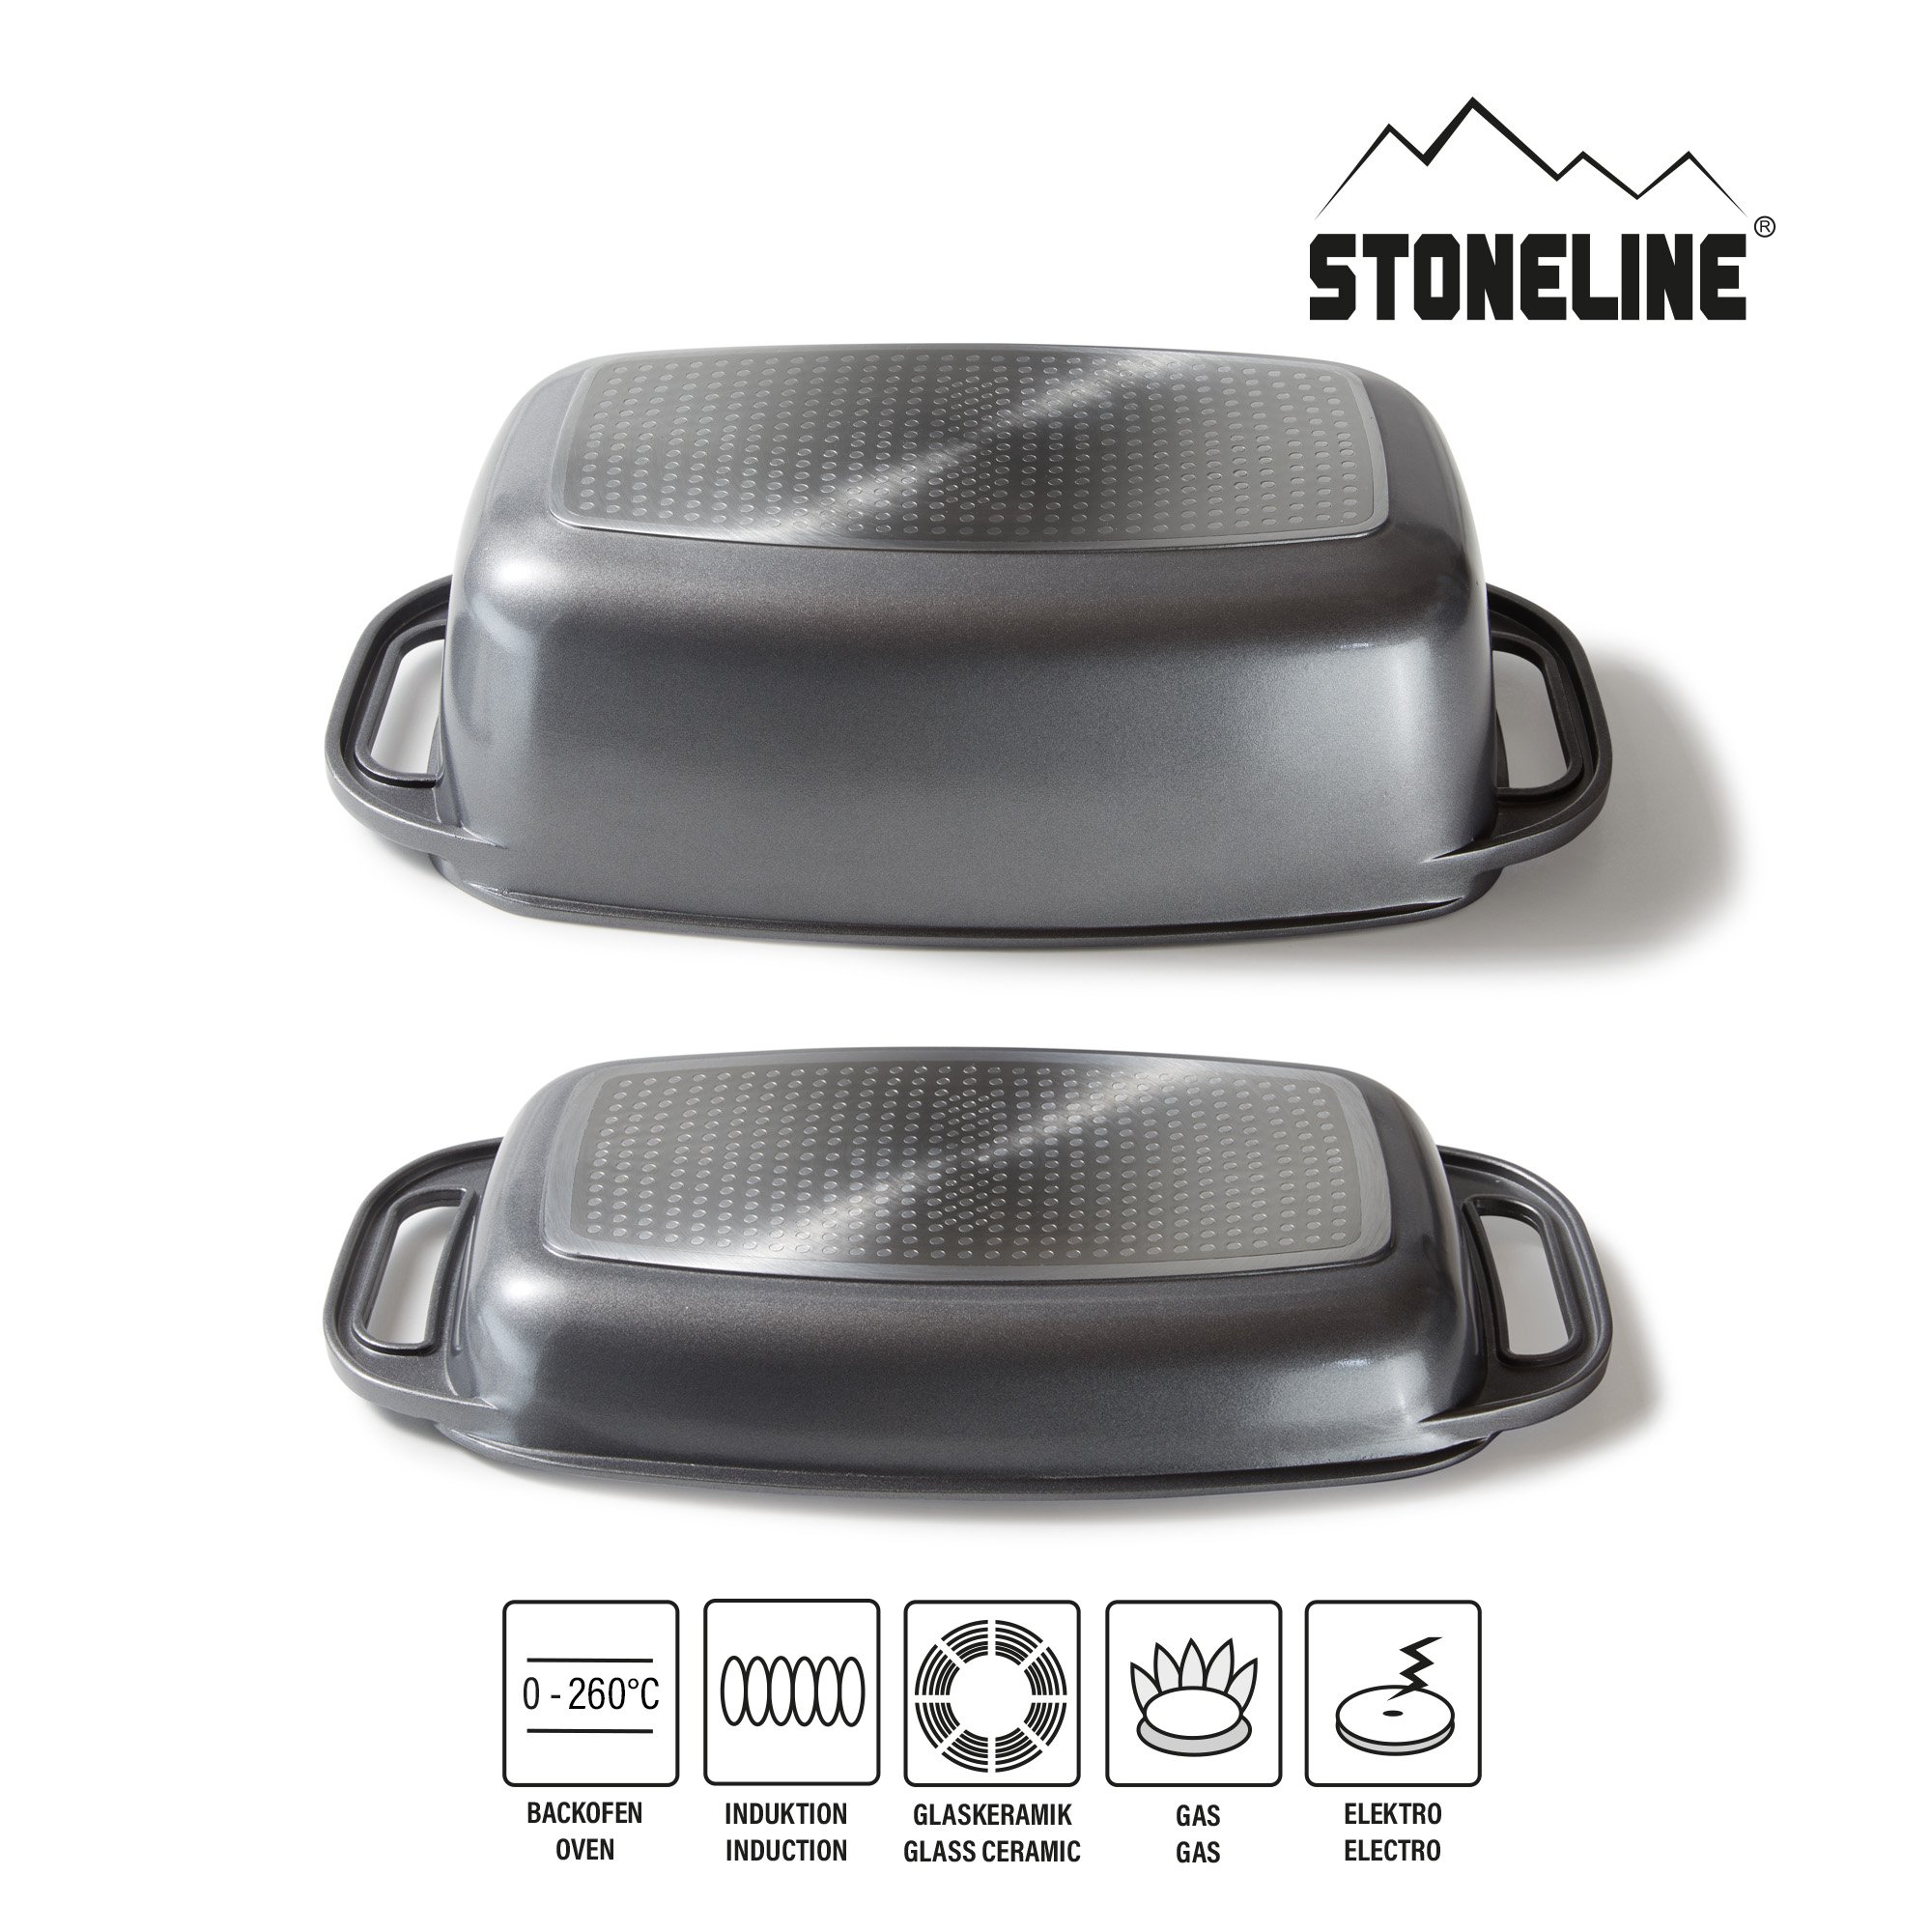 STONELINE® Induction Roaster 40x22 cm, with Induction Lid, Non-Stick Casserole Dish